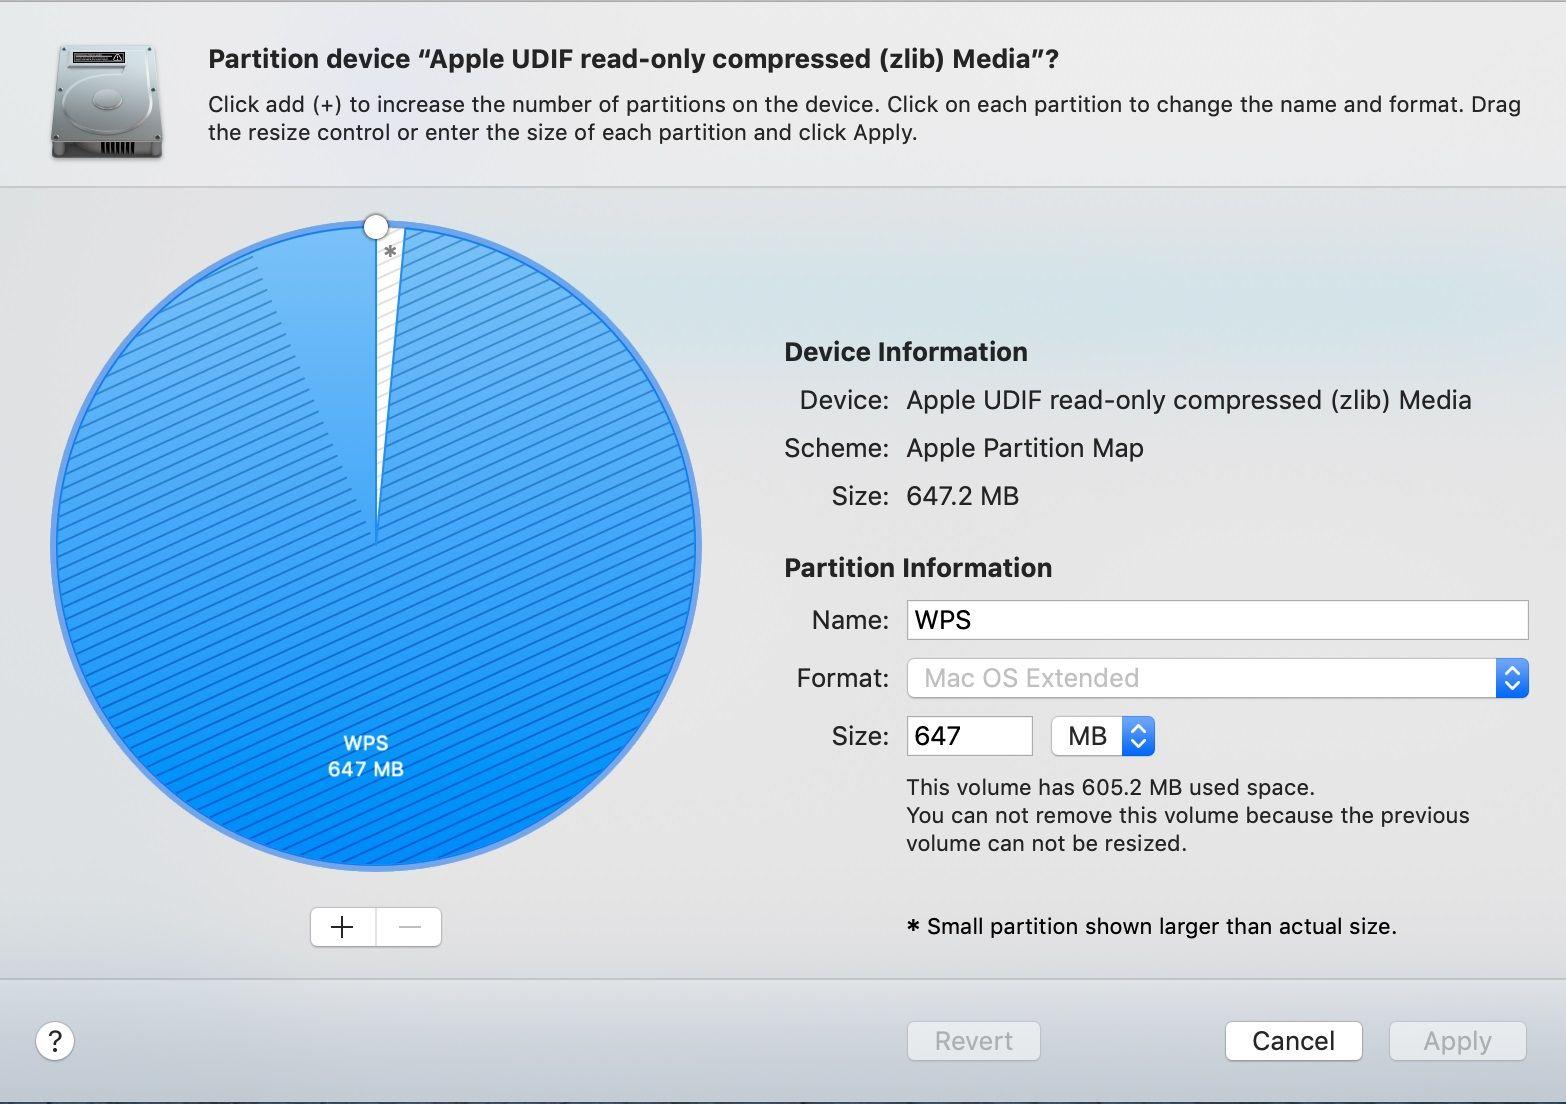 format a hard drive for mac using a pc